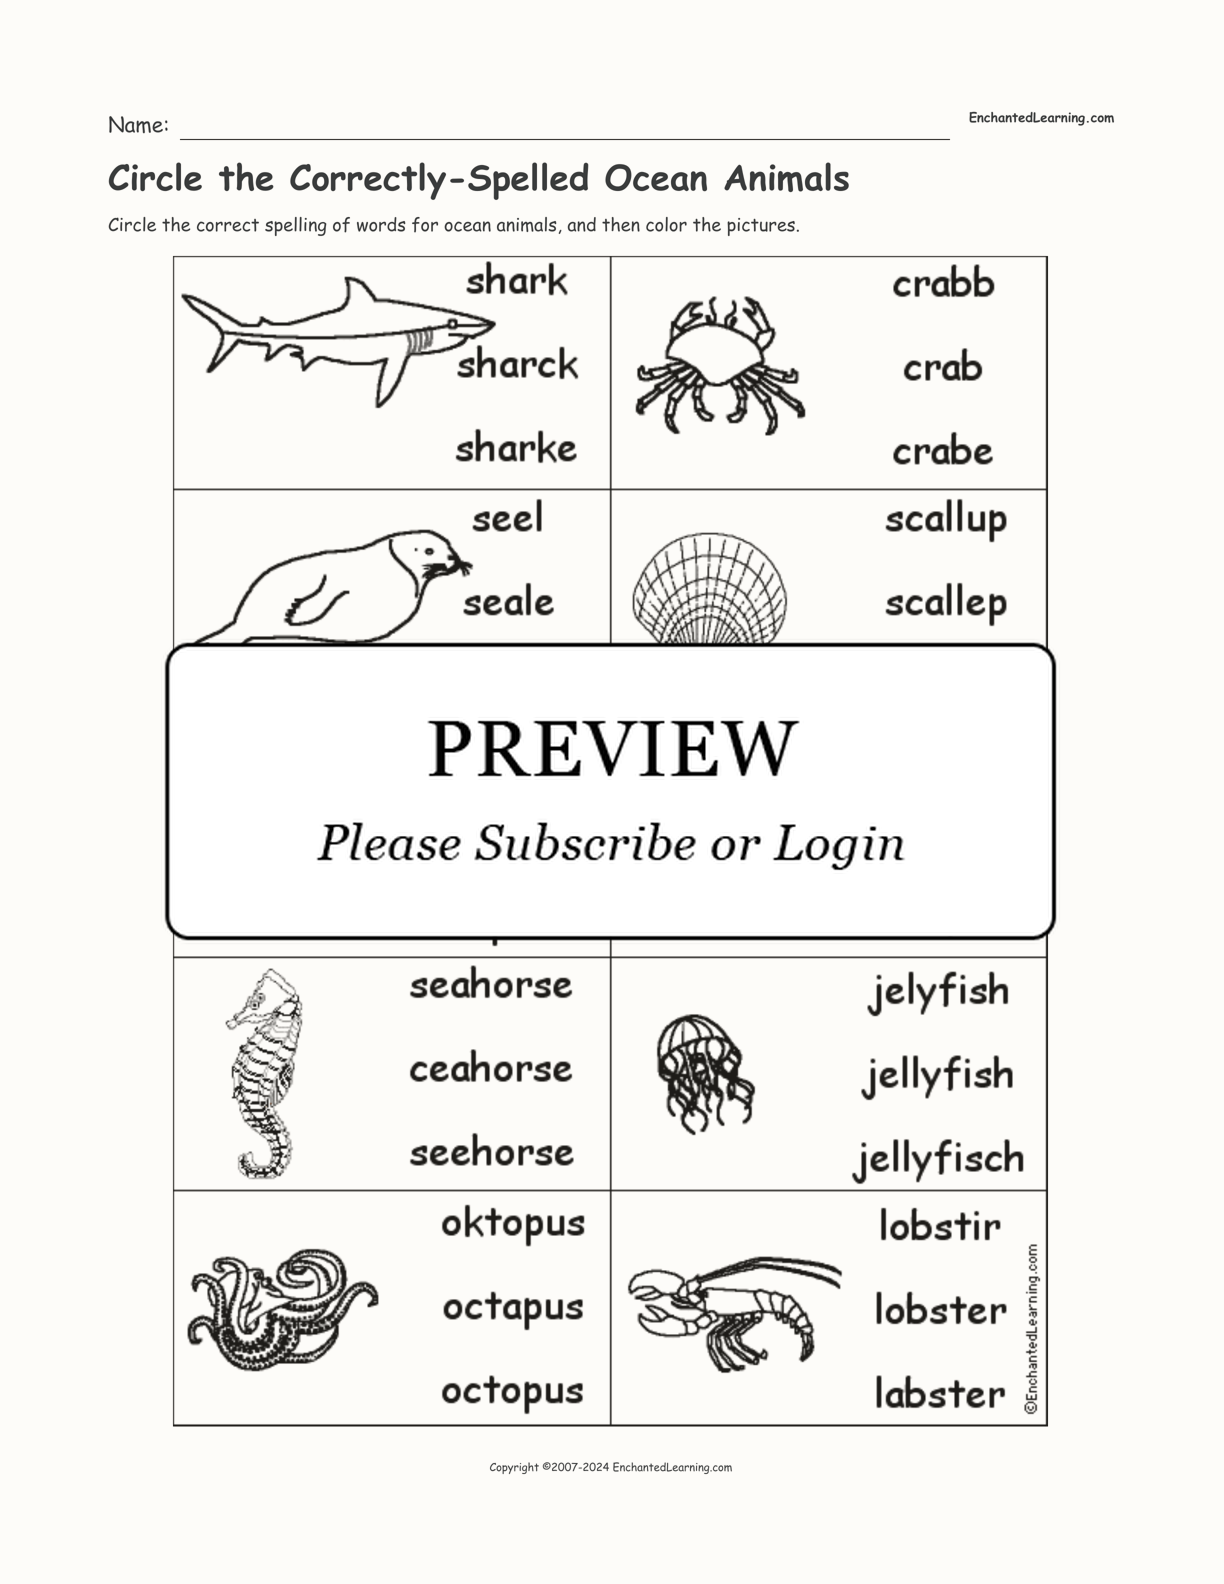 Circle the Correctly-Spelled Ocean Animals interactive worksheet page 1